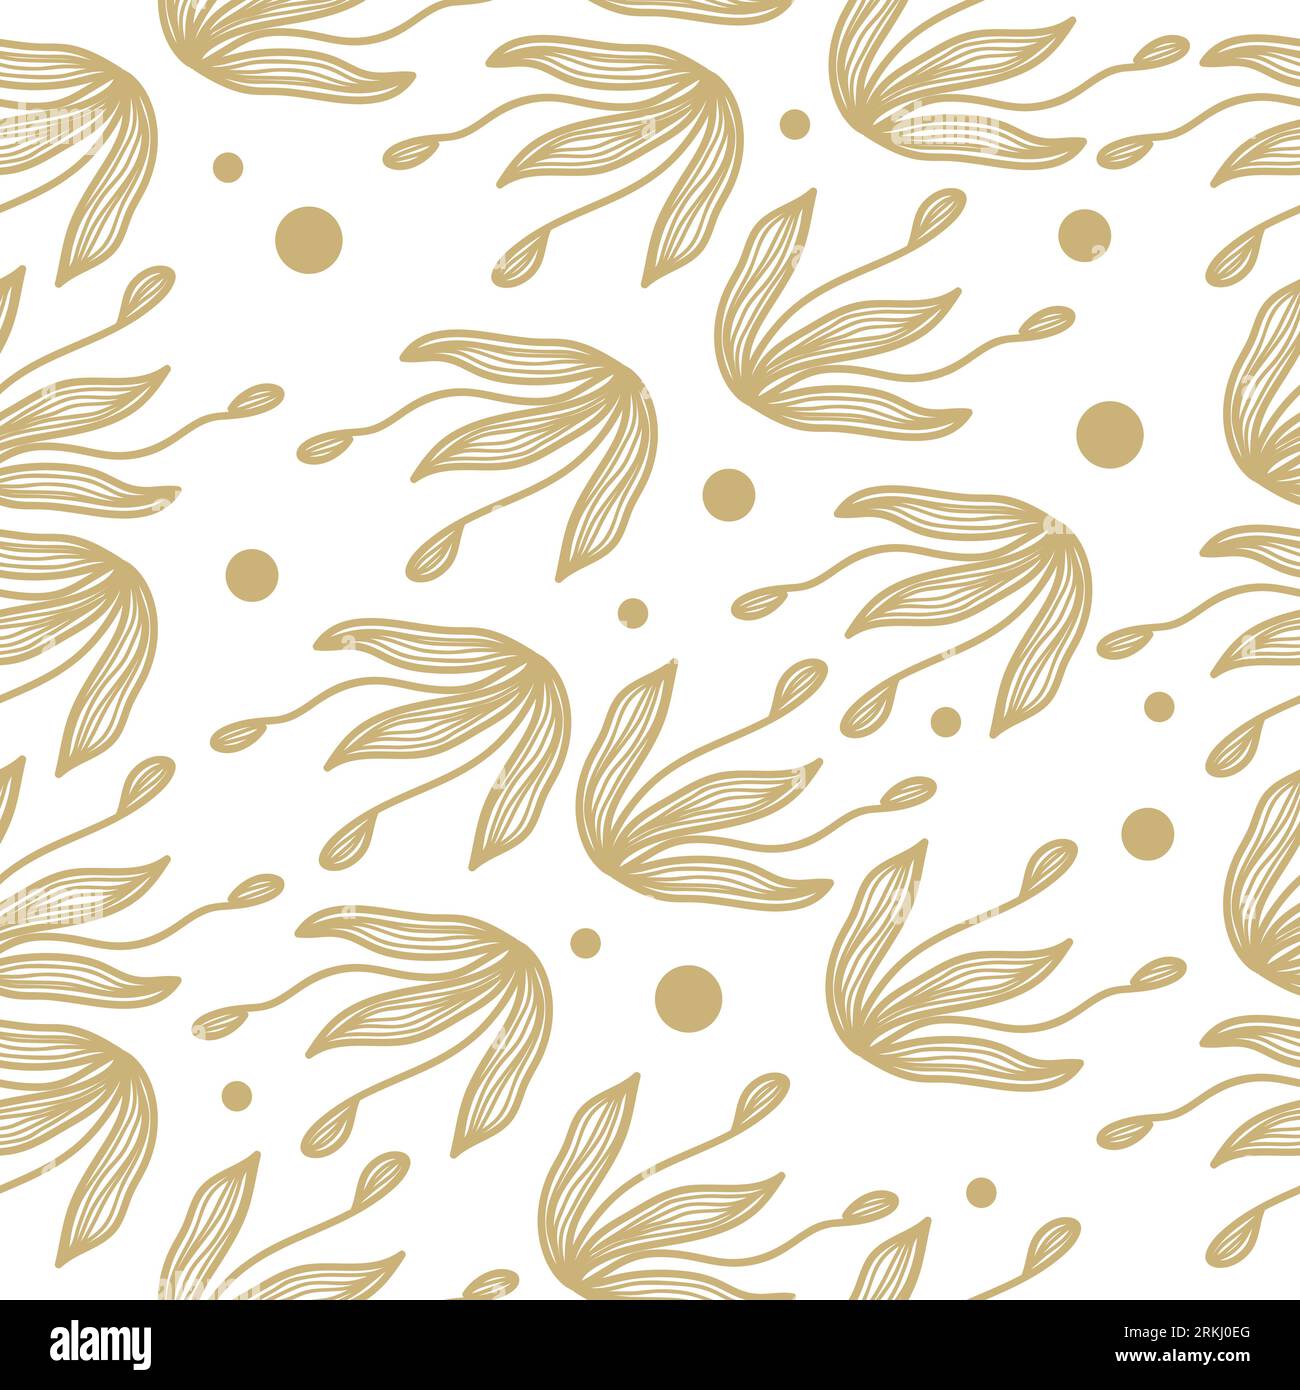 Seamless Cream Floral Pattern on White Background. Floral Motif for Fashion, Wallpaper, Wrapping Paper, Background, Fabric, Textile, Apparel, and Card Stock Vector